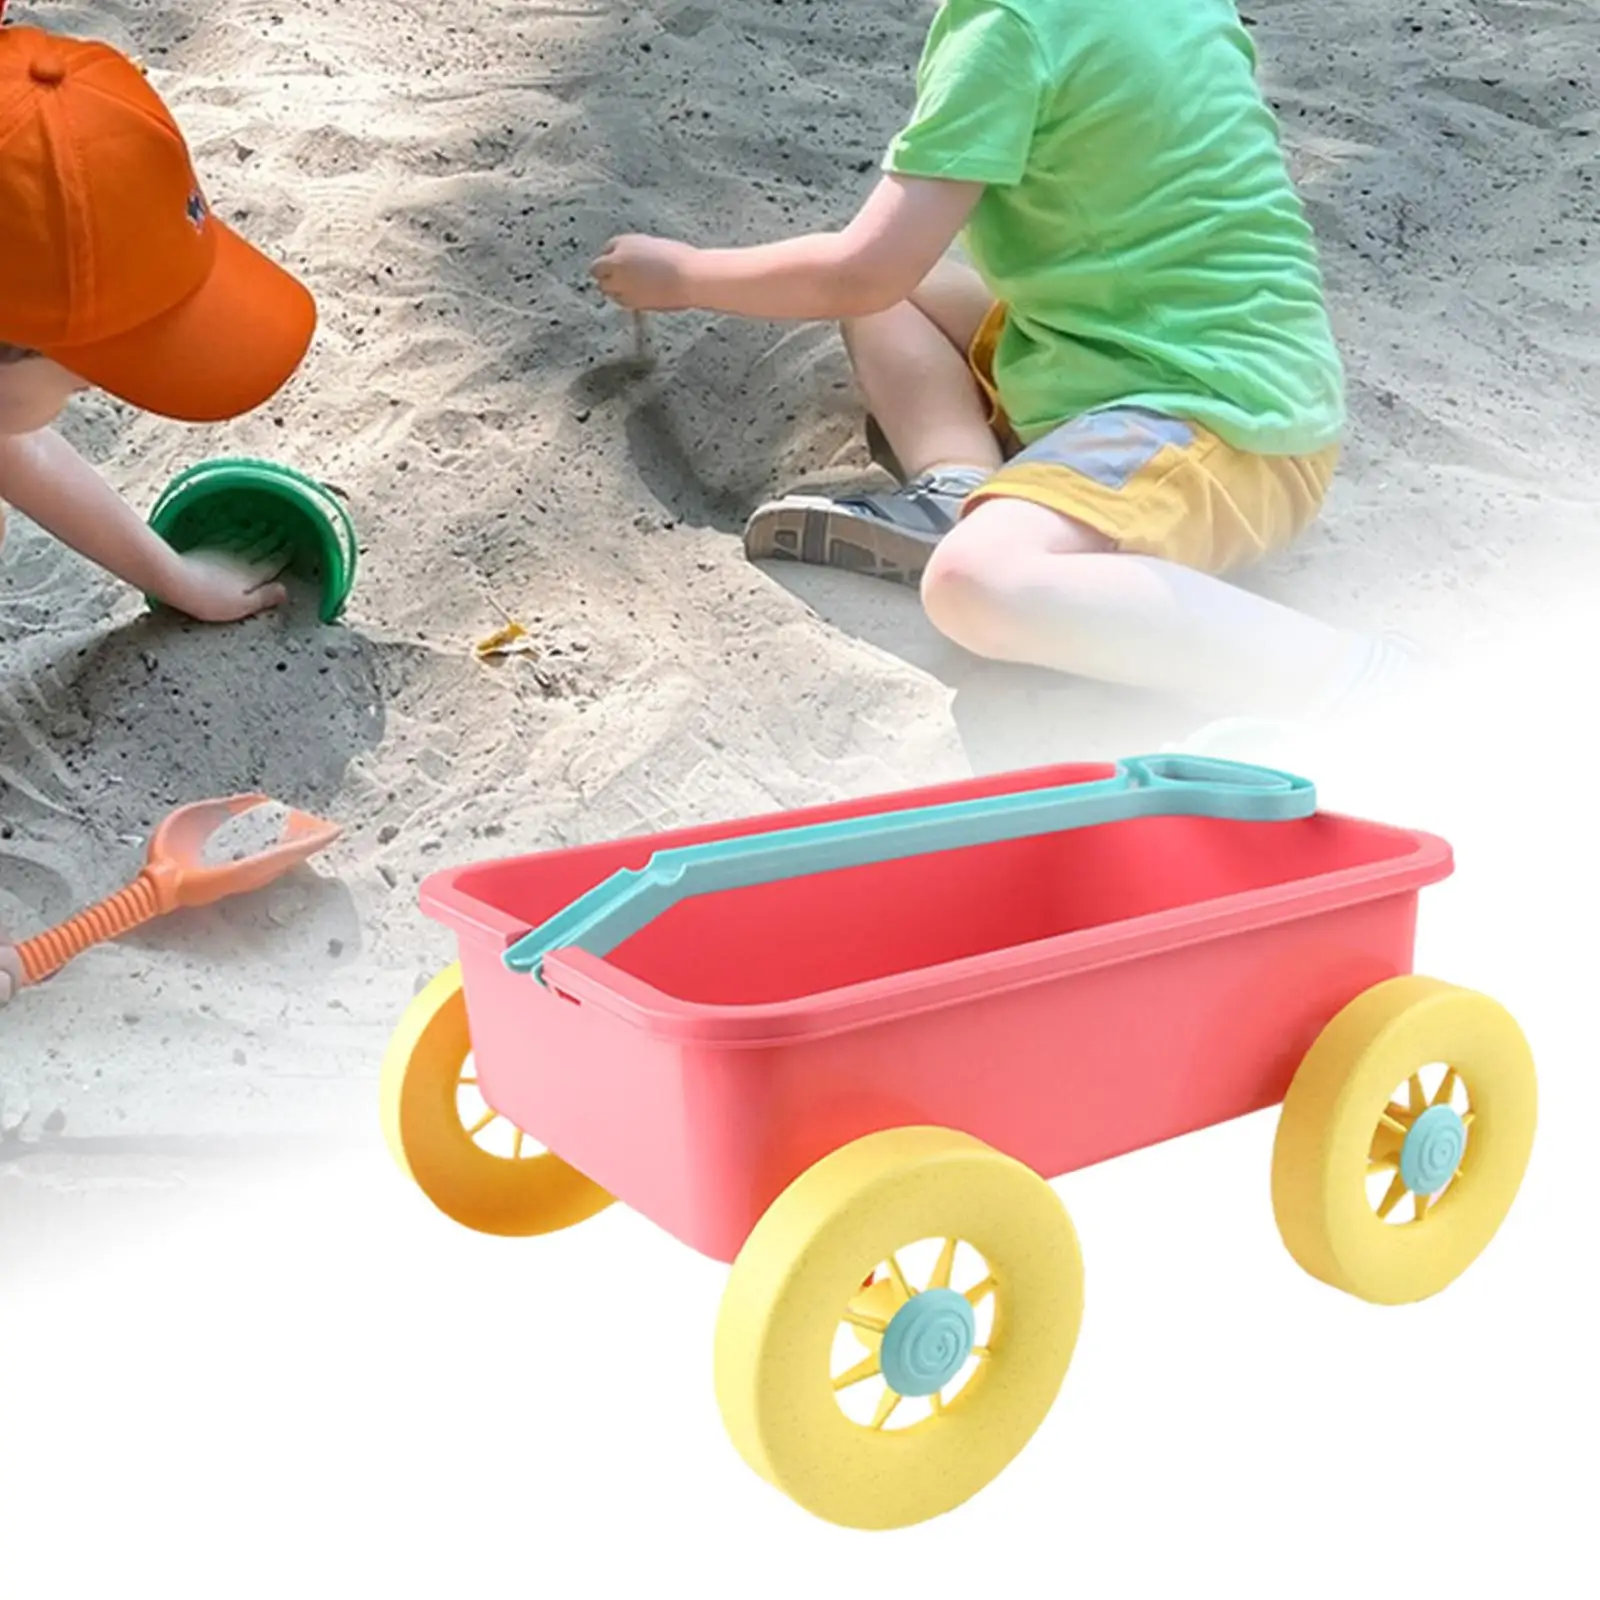 

Pretend Play Wagon Toy Beach Activities Beach Game Toy Kid Outdoor Toy Construction Vehicle for Indoor Seaside Beach Summer Yard